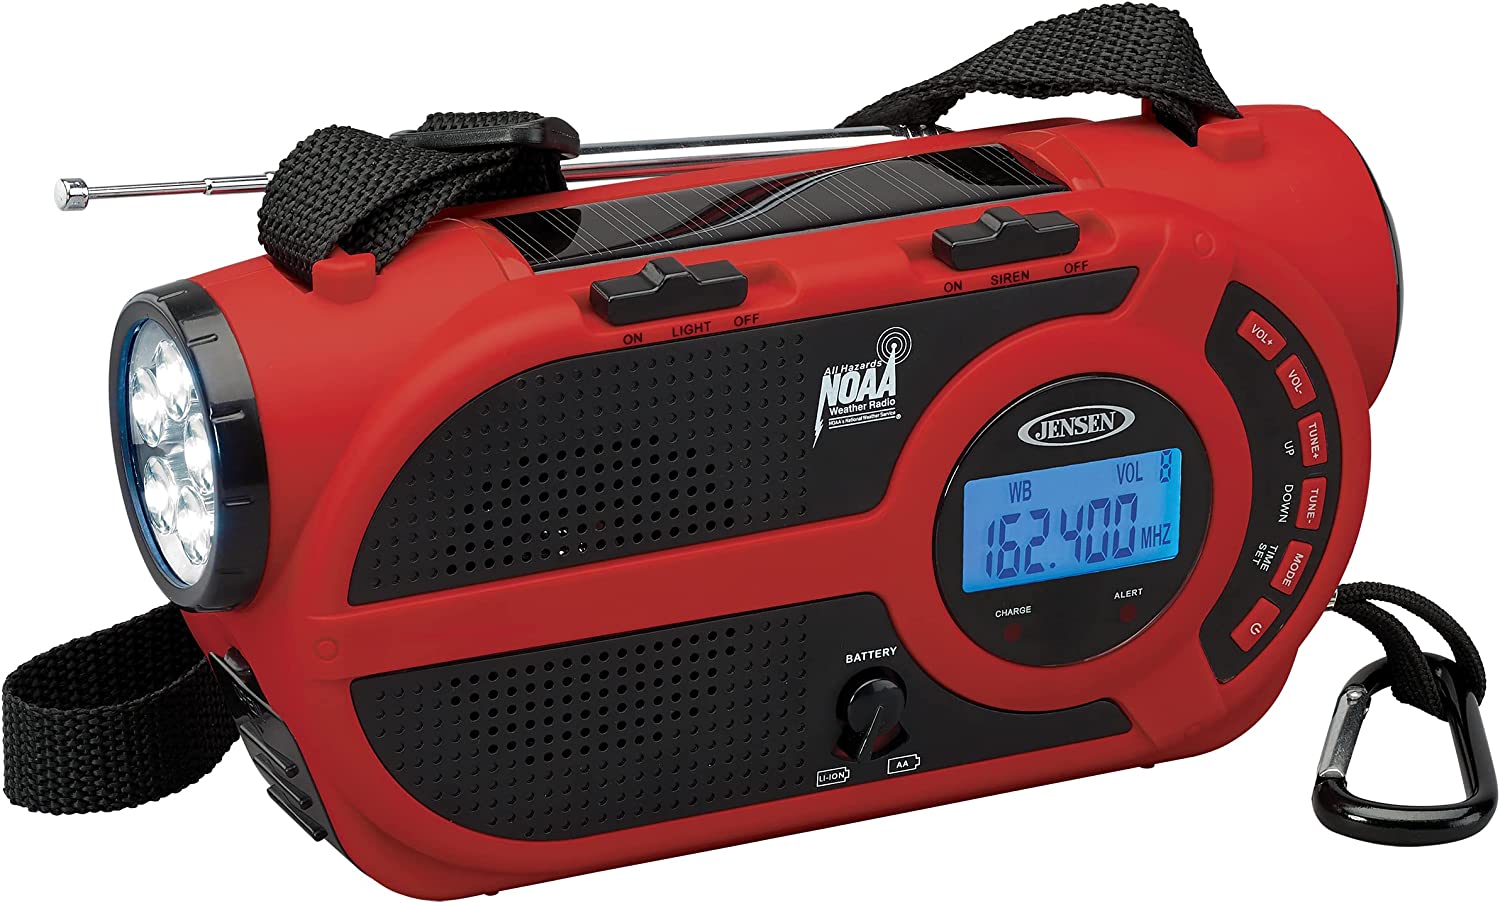 JENSEN JEP-650 AM/FM Weather Band/Weather Alert Radio with 4-Way Power, Built-in Flashlight and Emergency USB Charging